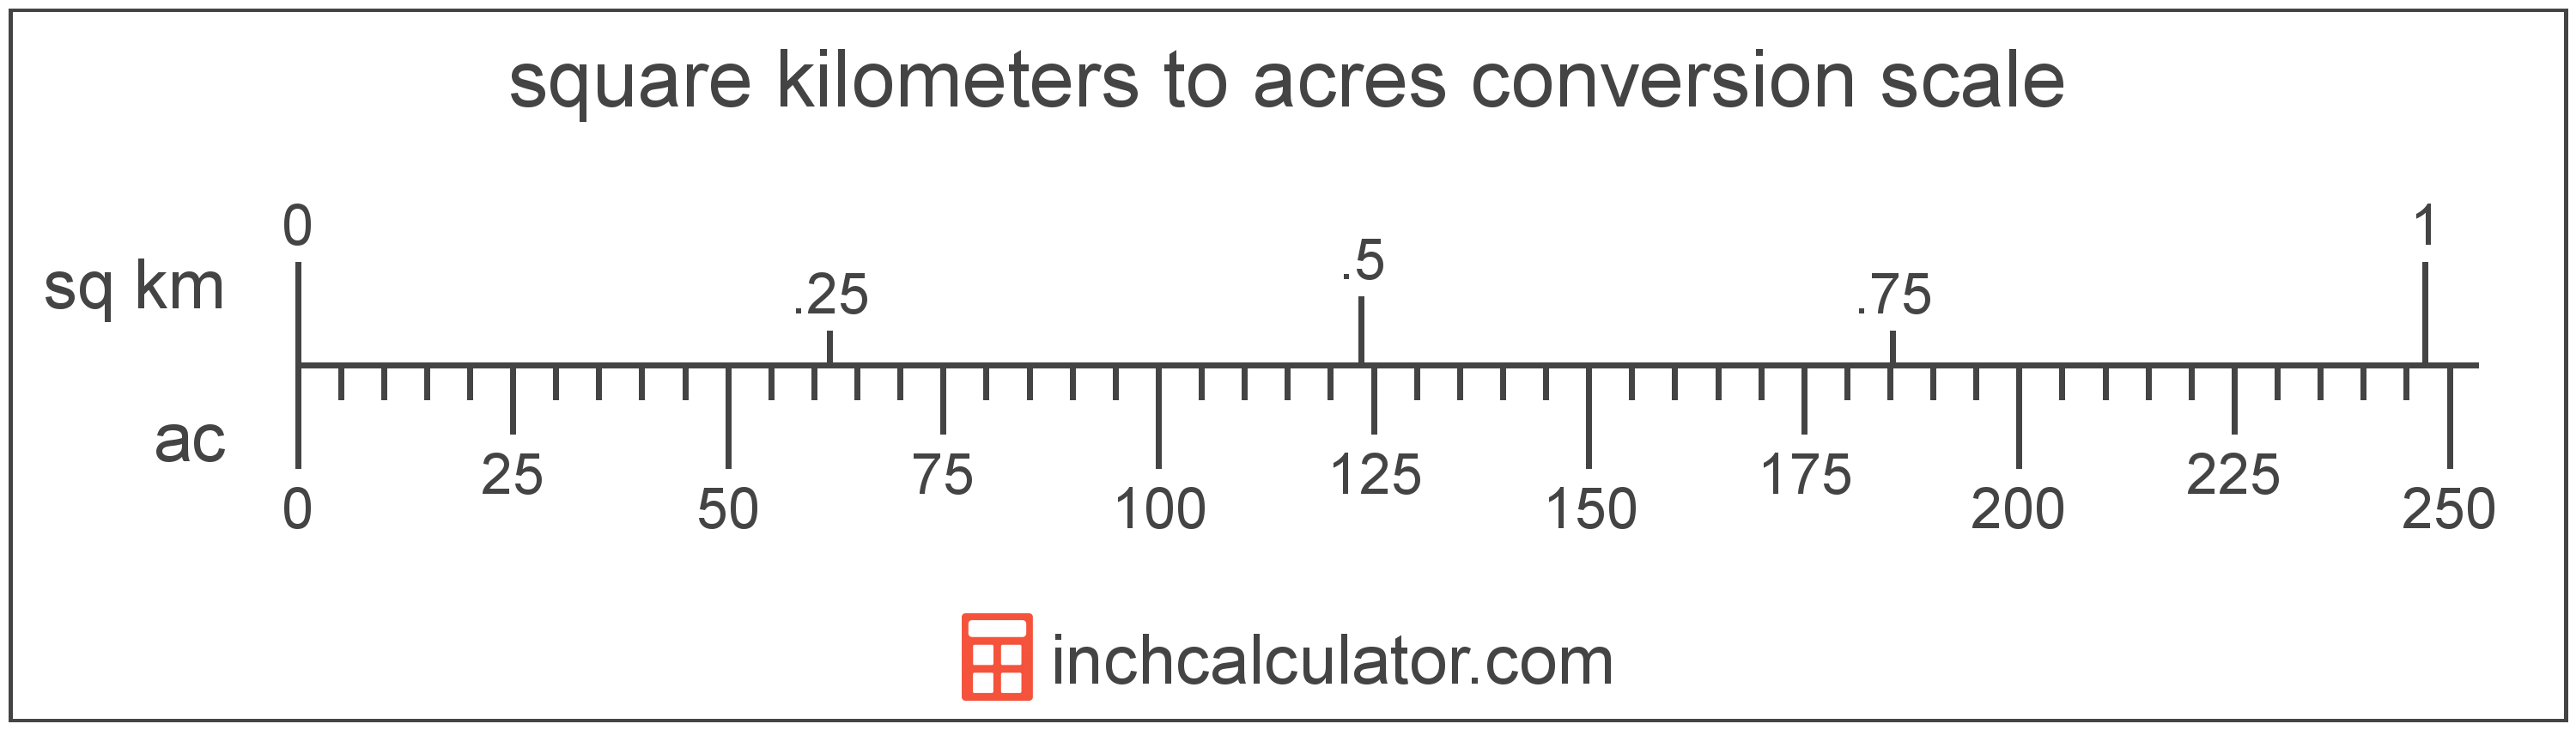 conversion scale showing acres and equivalent square kilometers area values